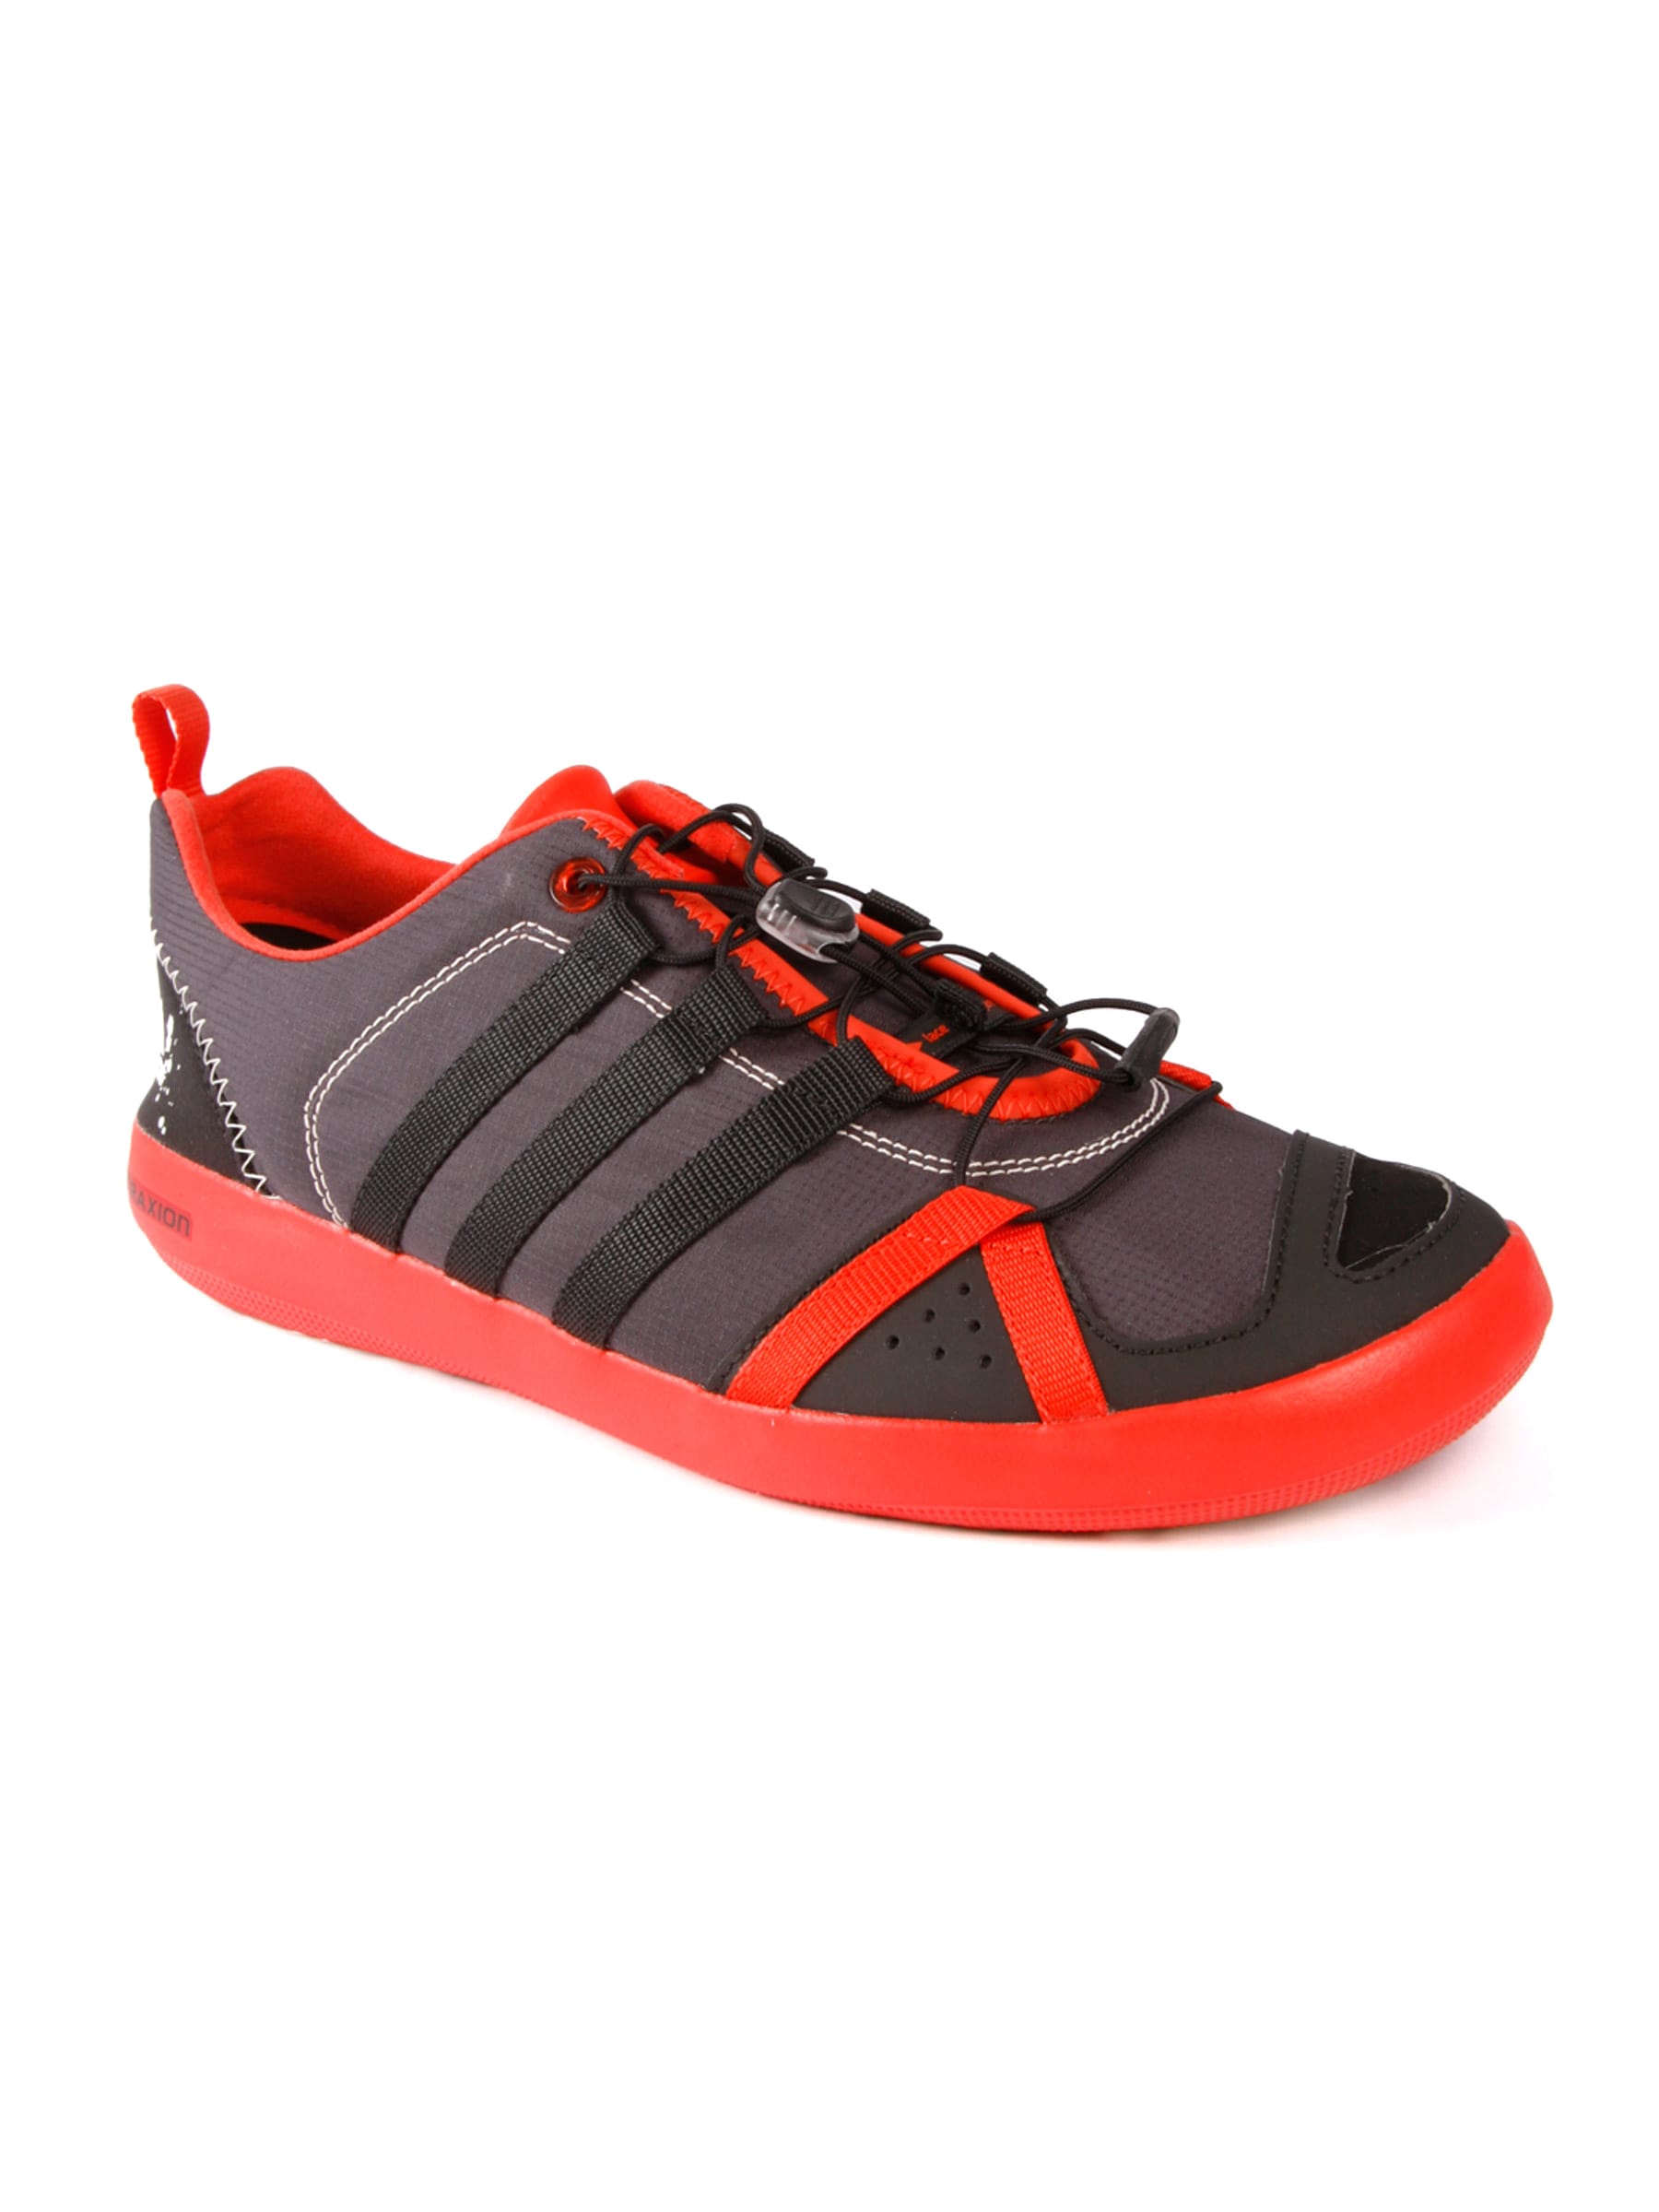 ADIDAS Men Speed Boat Grey Sports Shoes